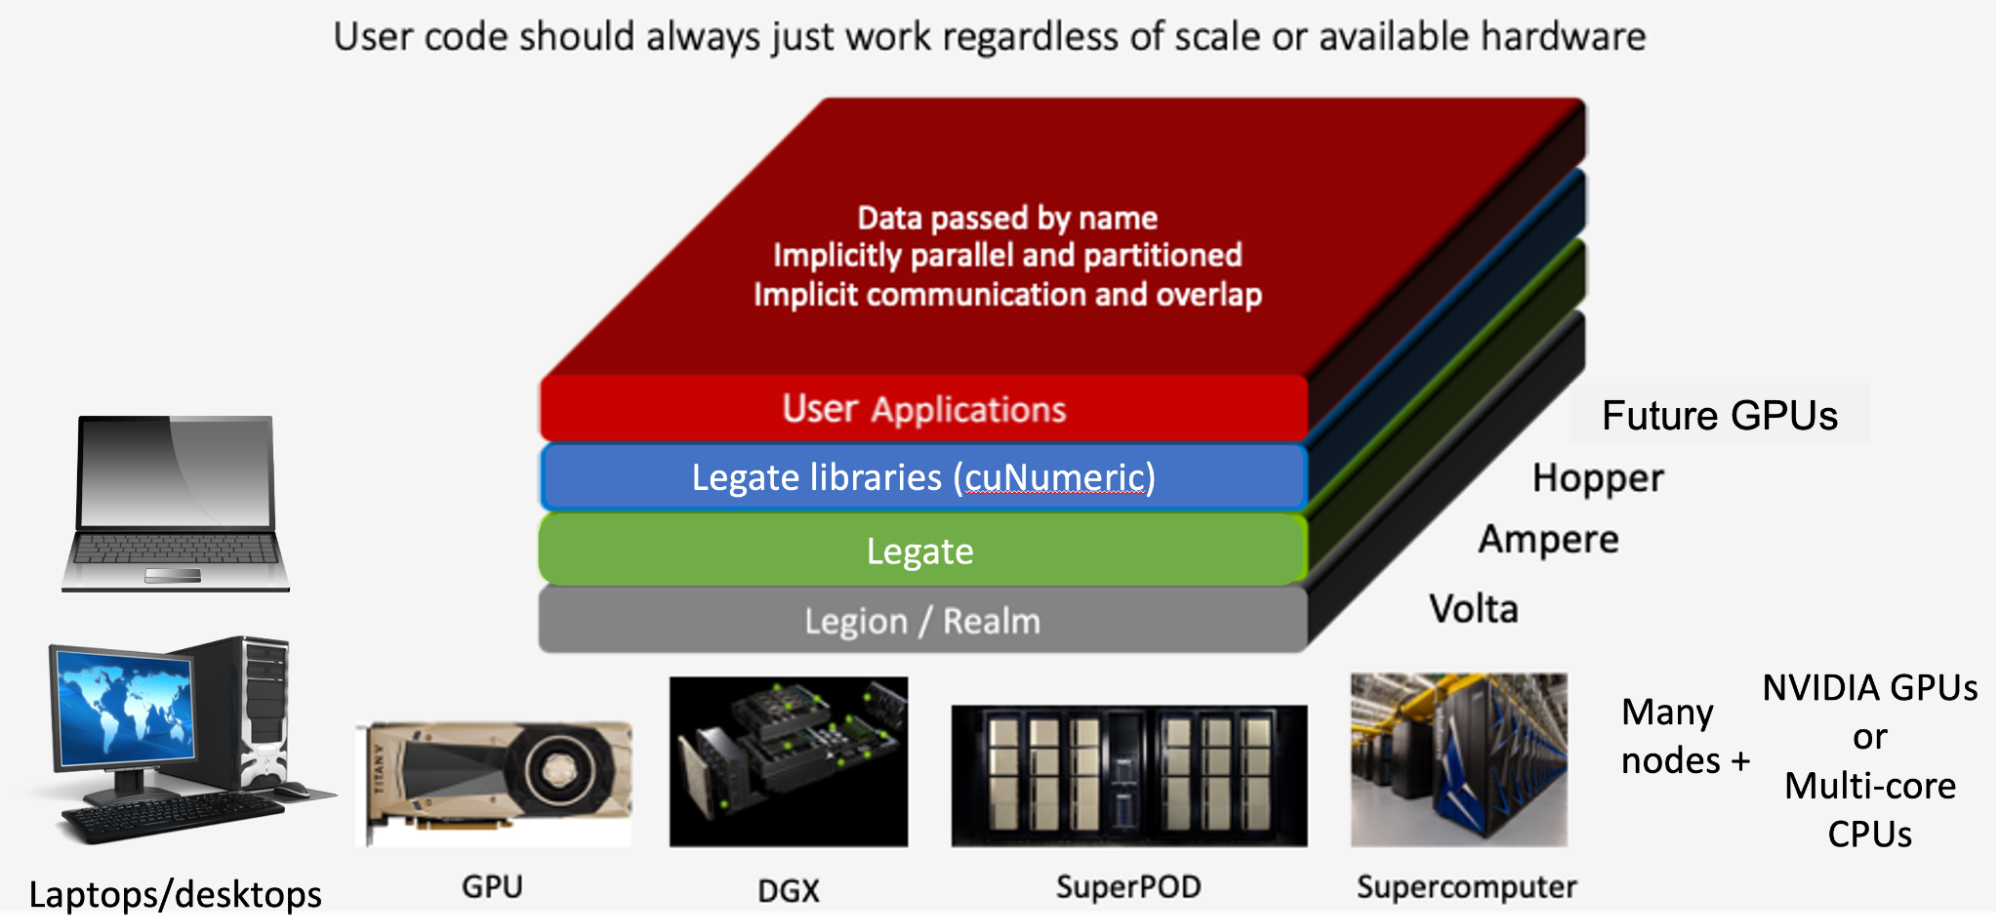 Figure shows an image of the Legate software stack in four colors consisting of Legion/Realm at the bottom, Legate  layered above, Legate libraries (like cuNumeric) layered above, and final User applications at the top. It is surrounded by different GPU-based devices and computers to show that Legate-based code will work on almost any kind of architecture.